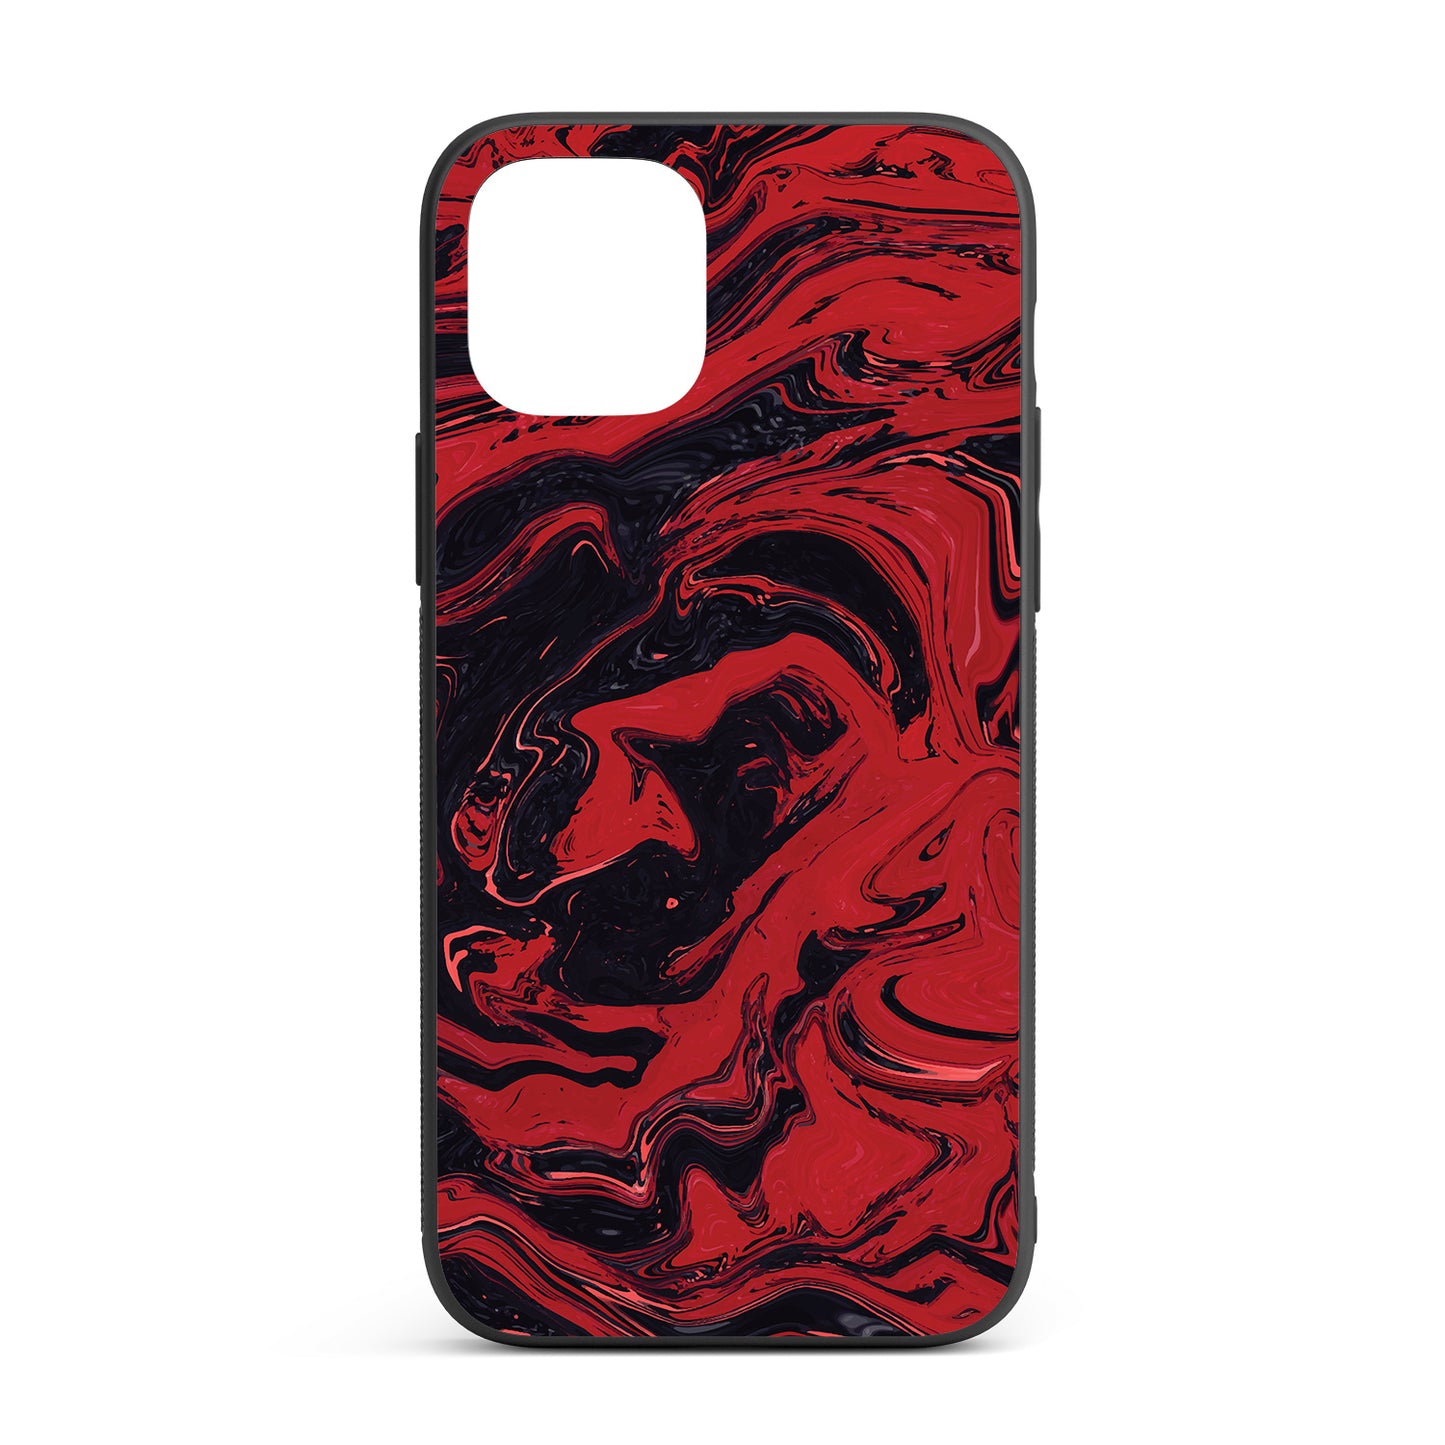 Misty Ruby iPhone glass case